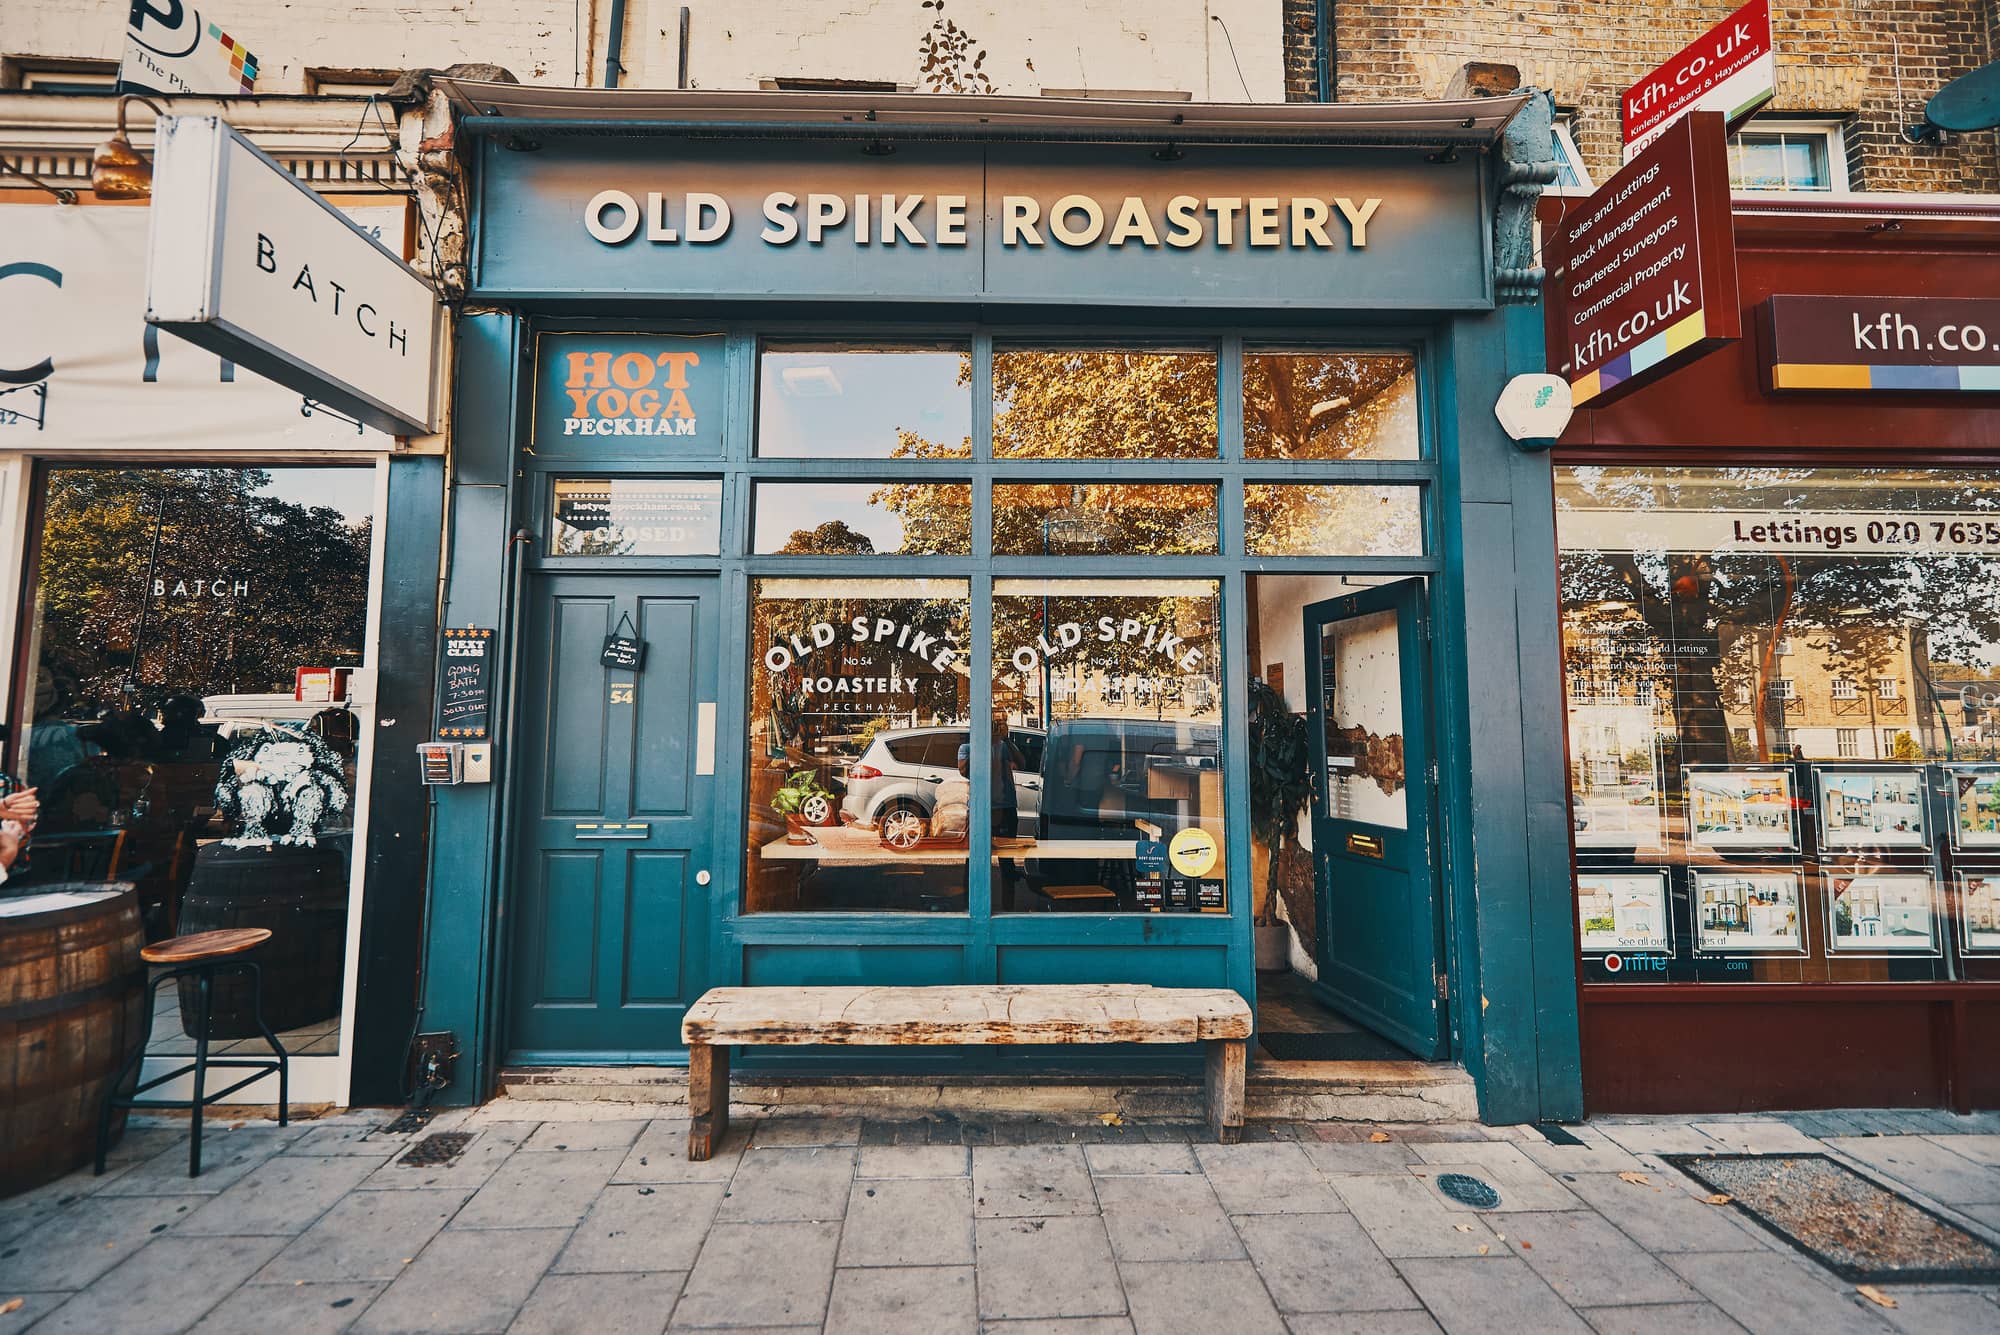 Old Spike: A coffee roastery and cafe that provides training and